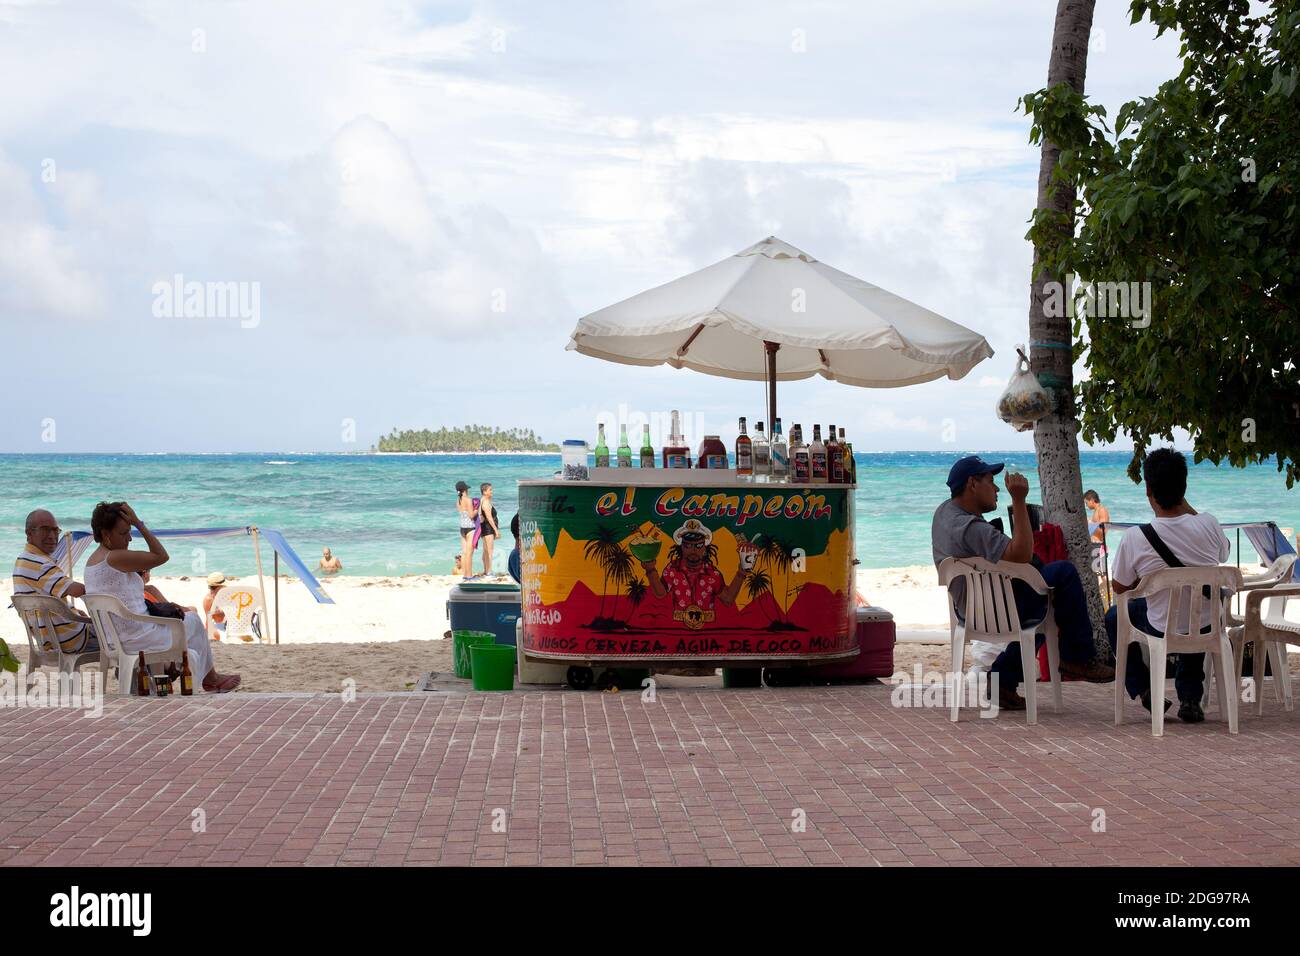 San Andres Island, Colombia, South America - People at a beach stand selling drinks in the main beach of the island. Stock Photo